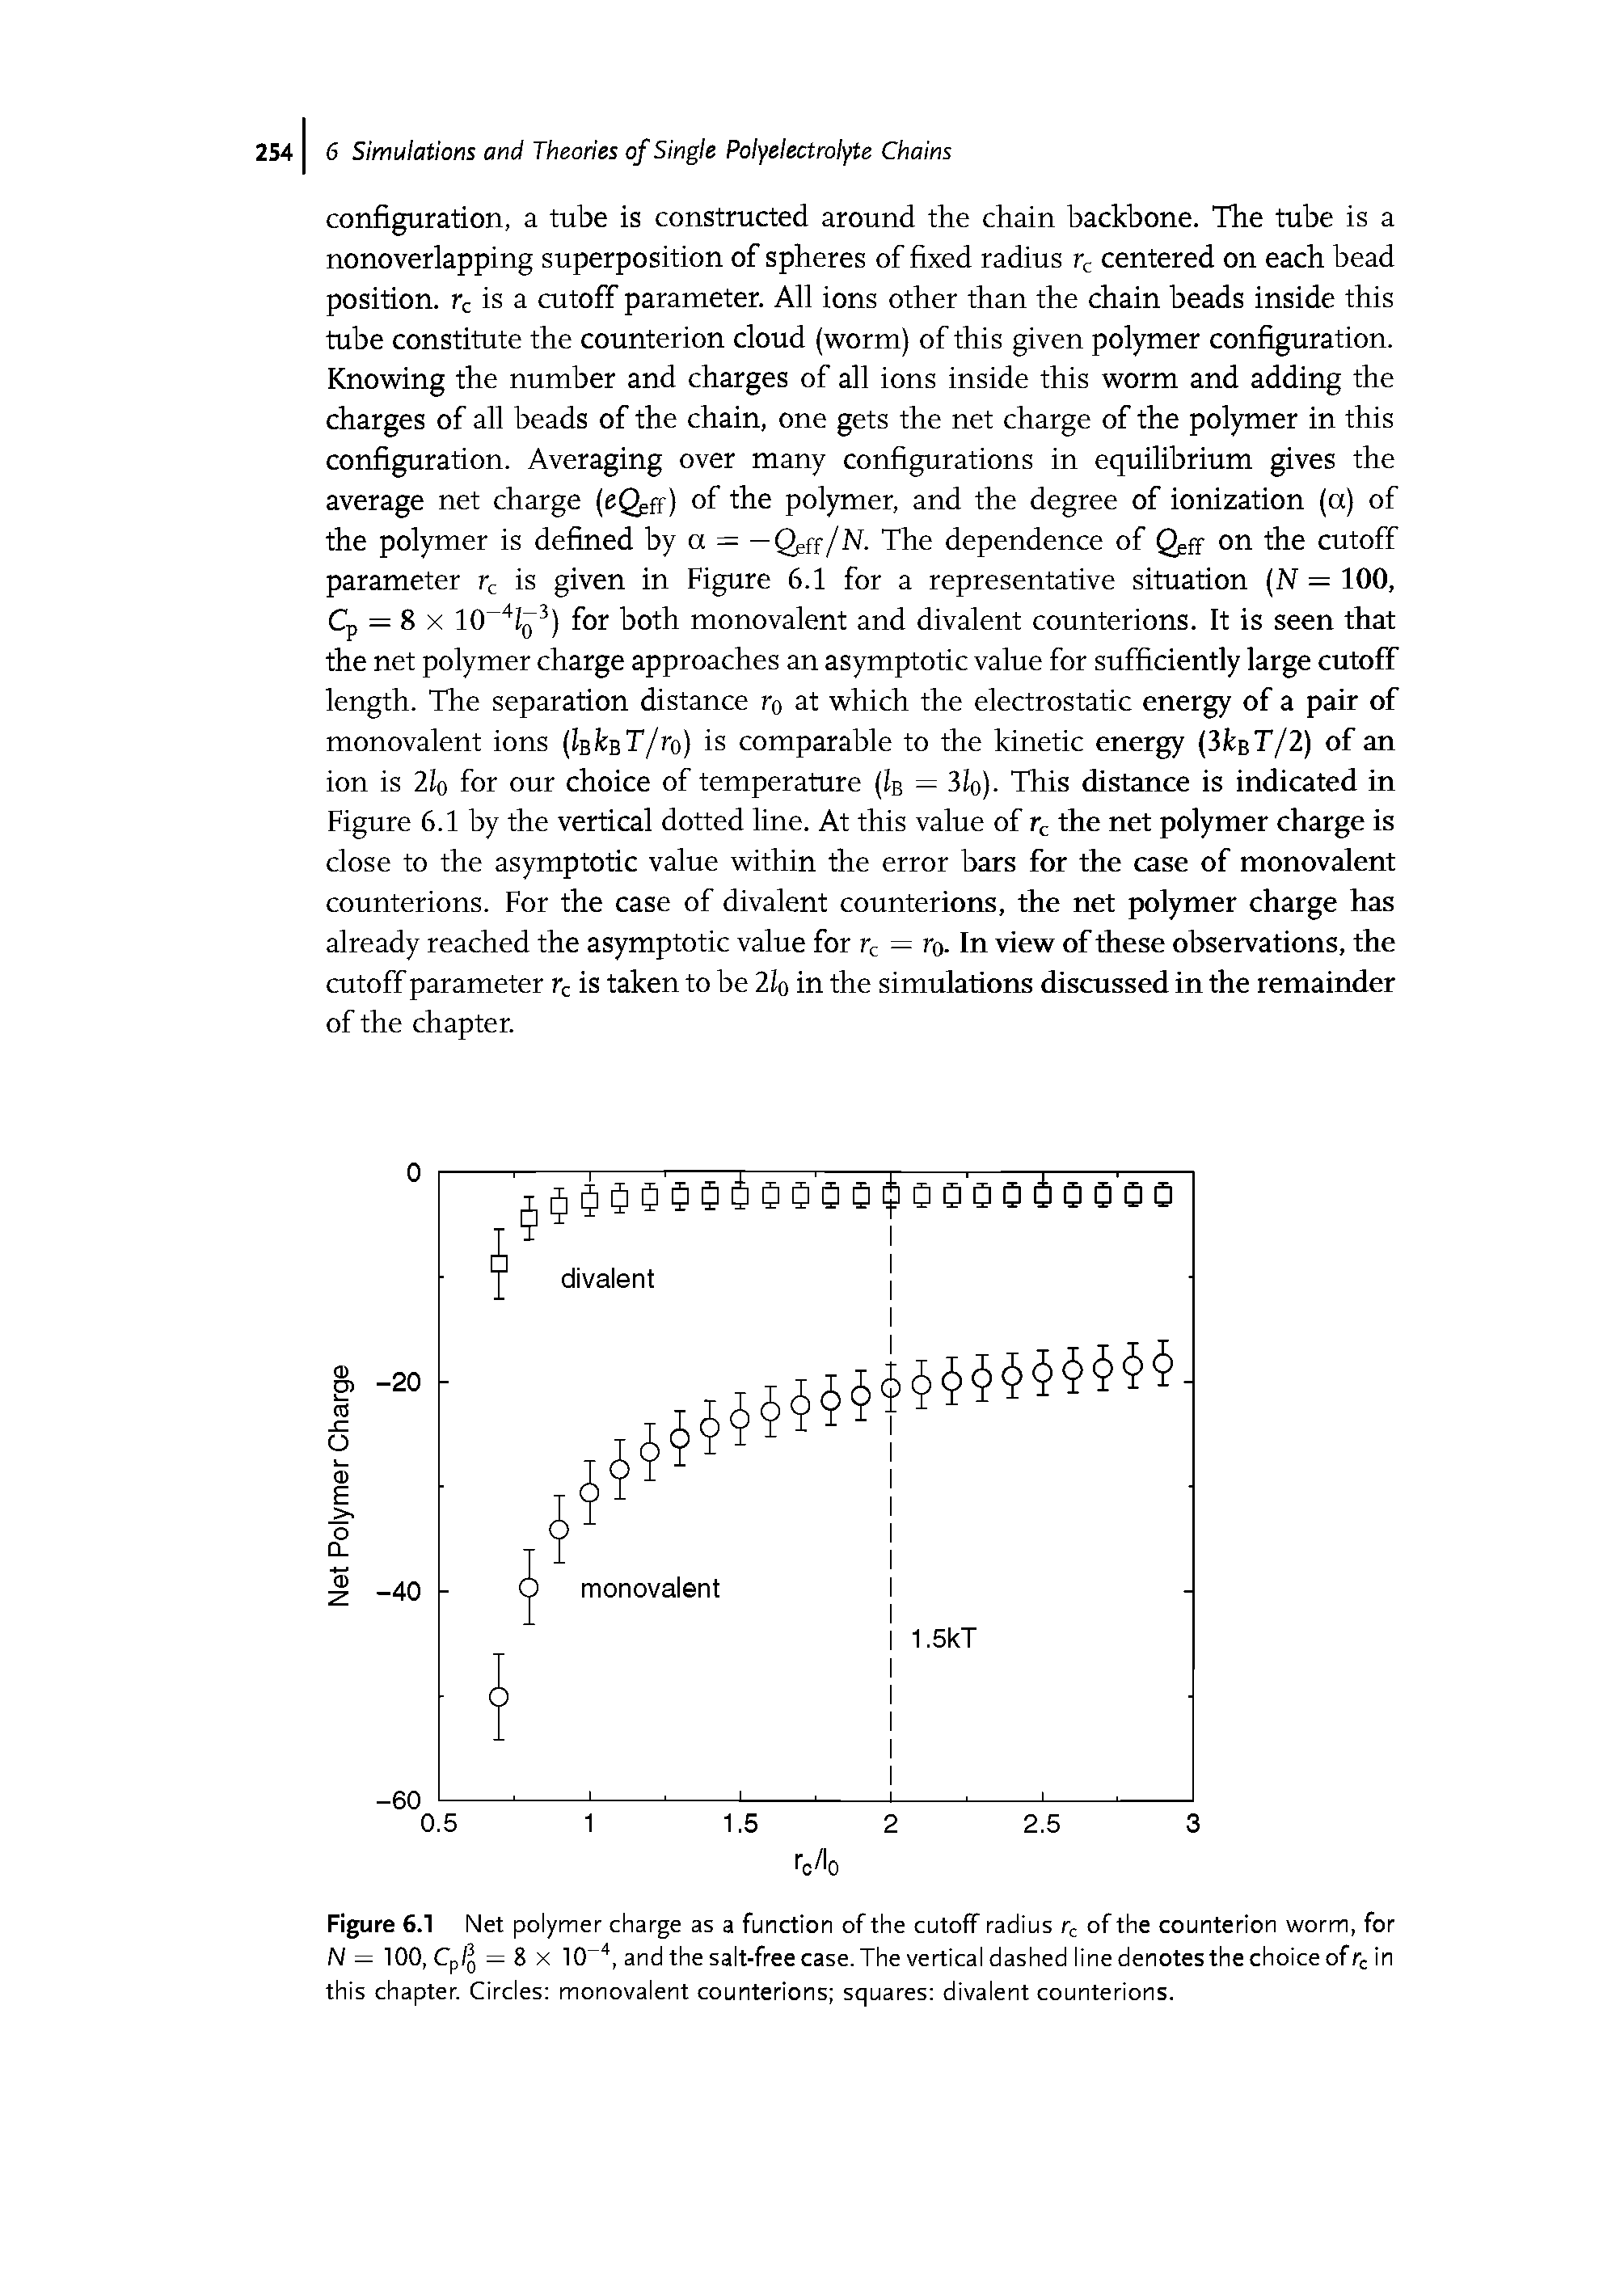 Figure 6.1 Net polymer charge as a function of the cutoff radius of the counterion worm, for N = 100, Cp/j = 8 X 10 , and the salt-free case. The vertical dashed line denotes the choice of in this chapter. Circles monovalent counterions squares divalent counterions.